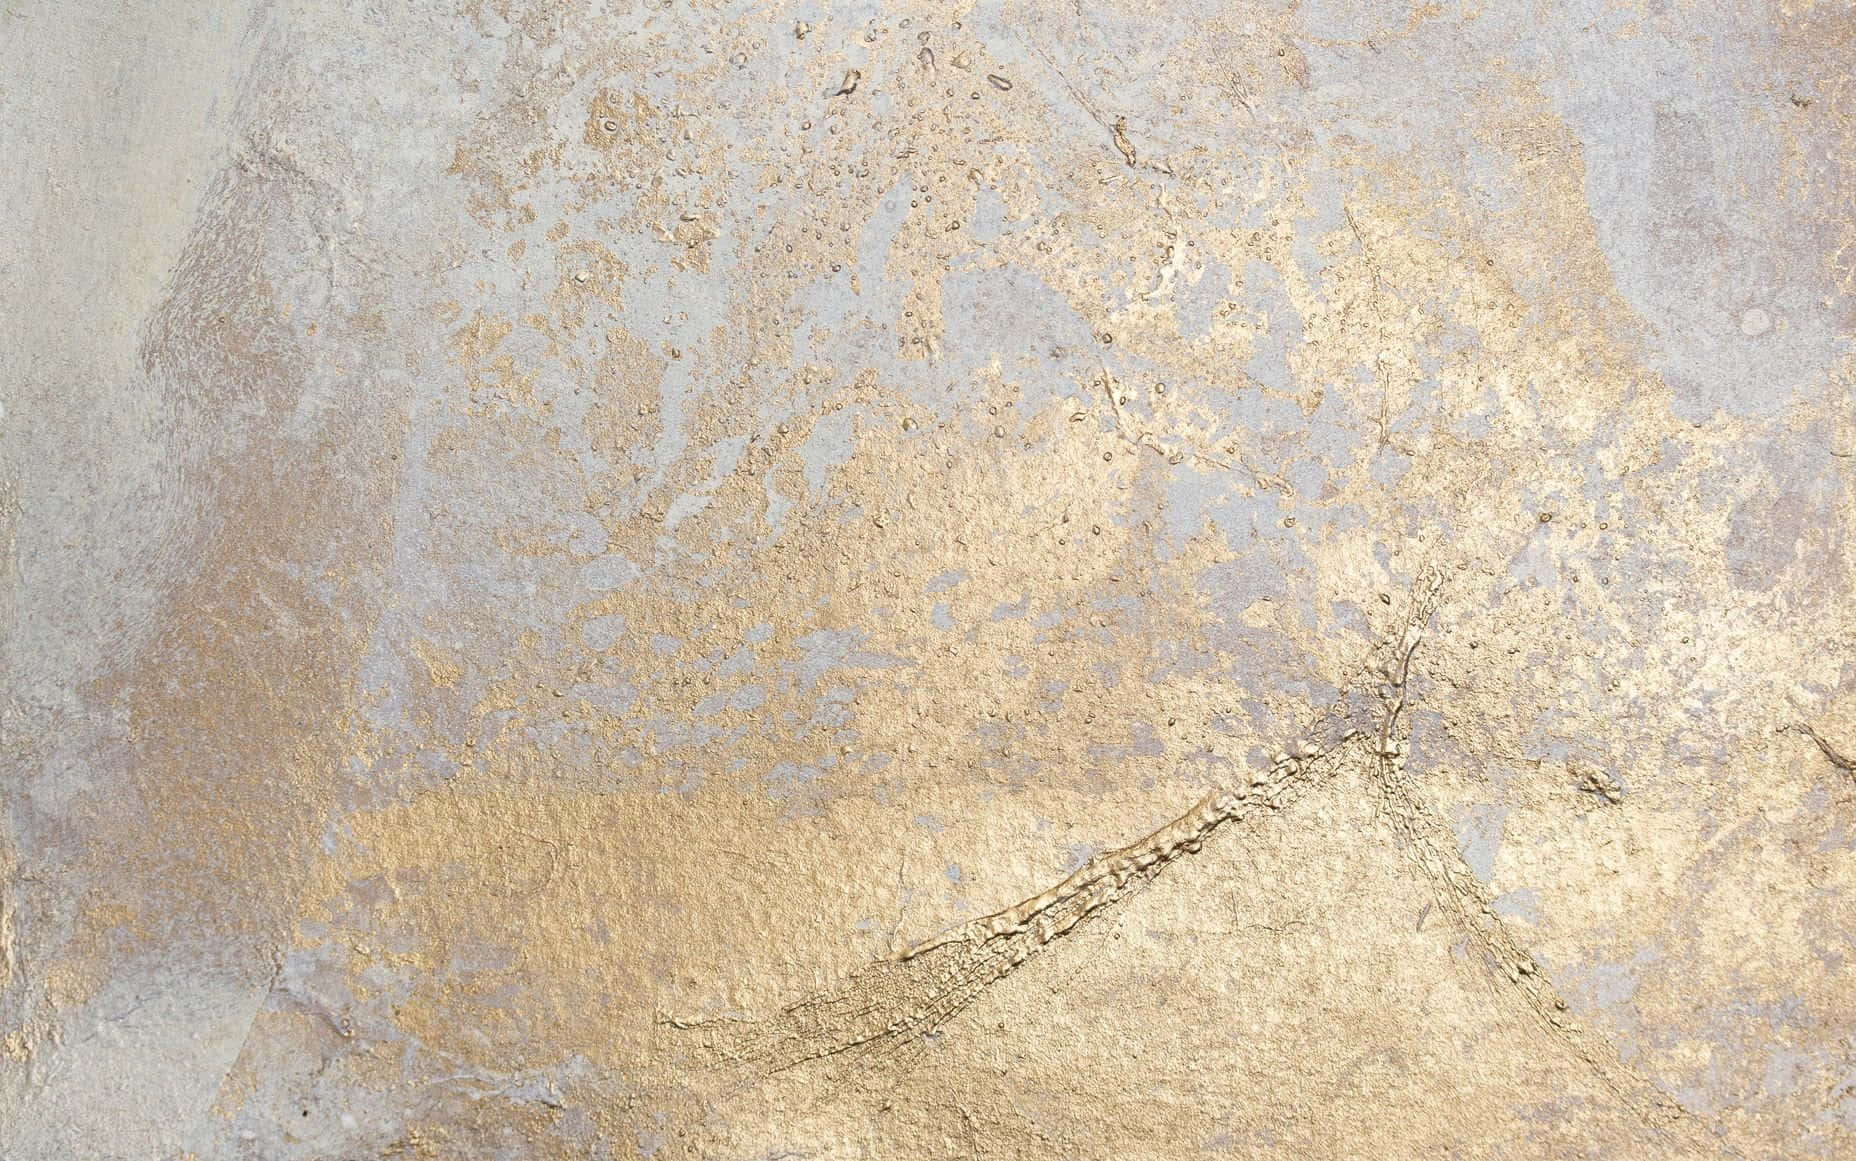 a close up of a gold and silver painted wall